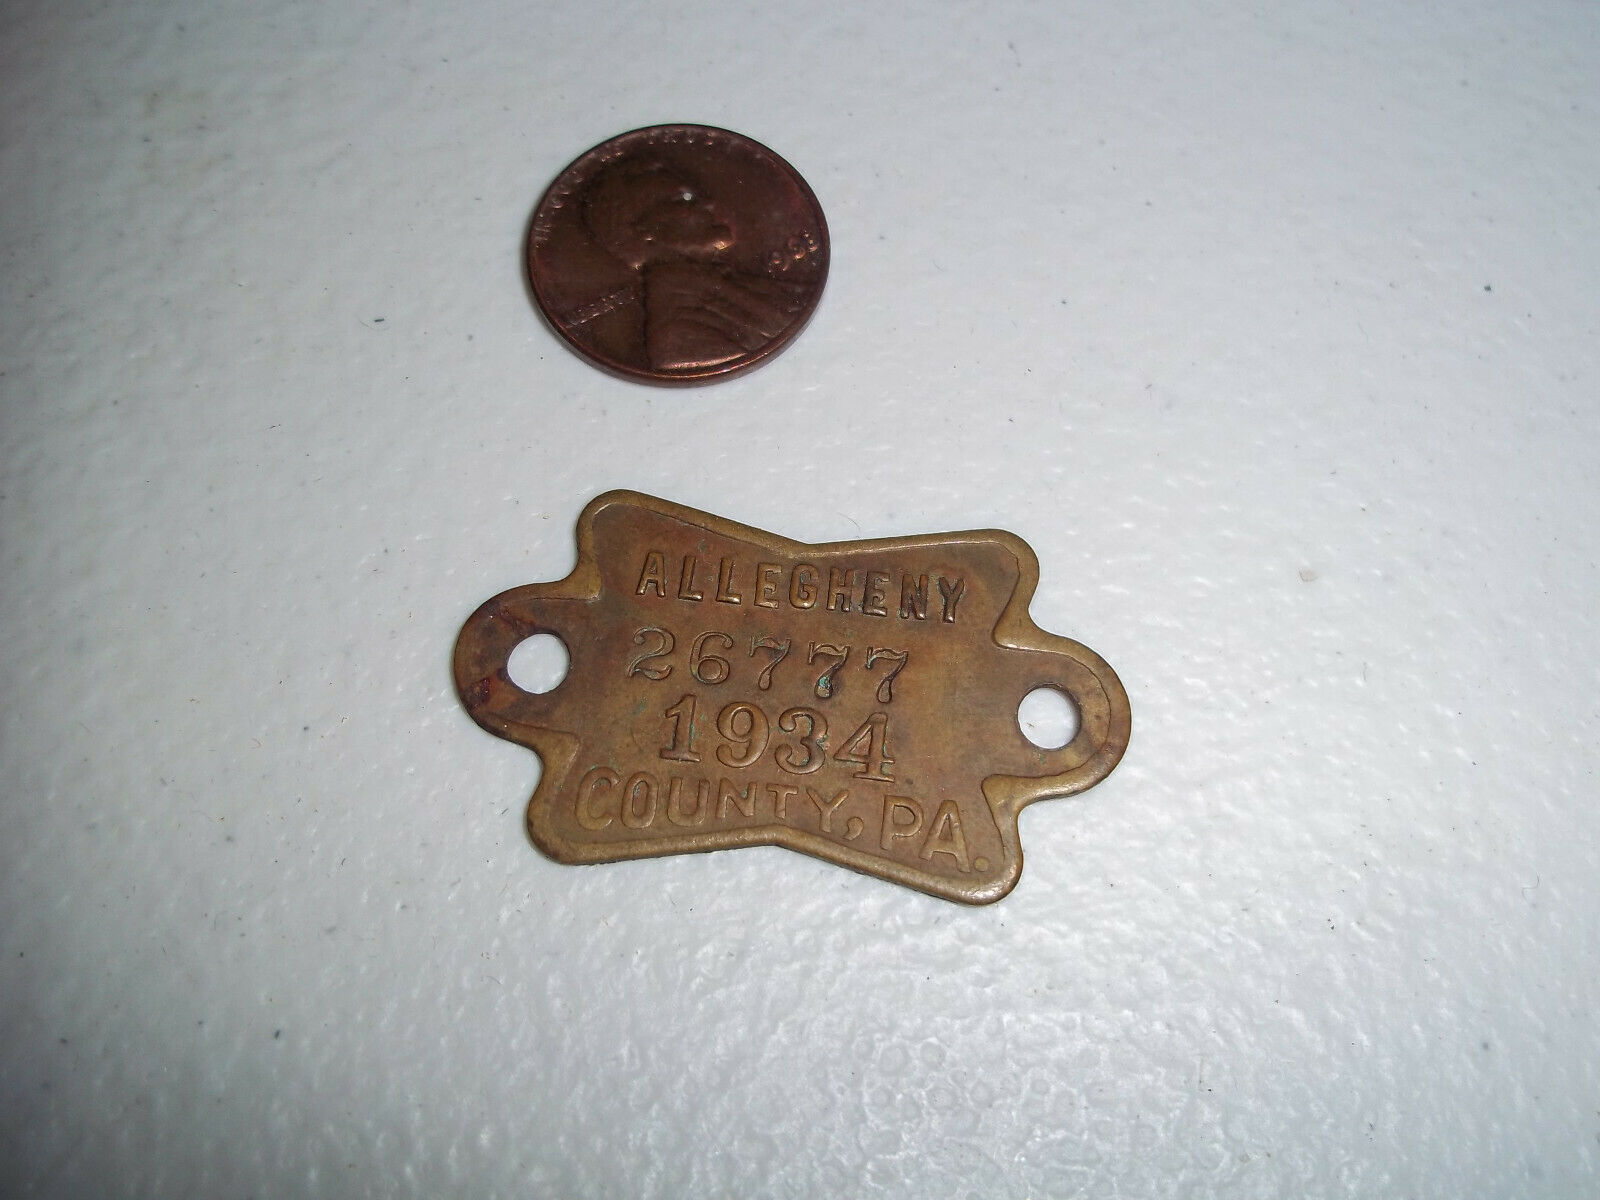 Vintage 1934 Dog Tag Allegheny County Pa